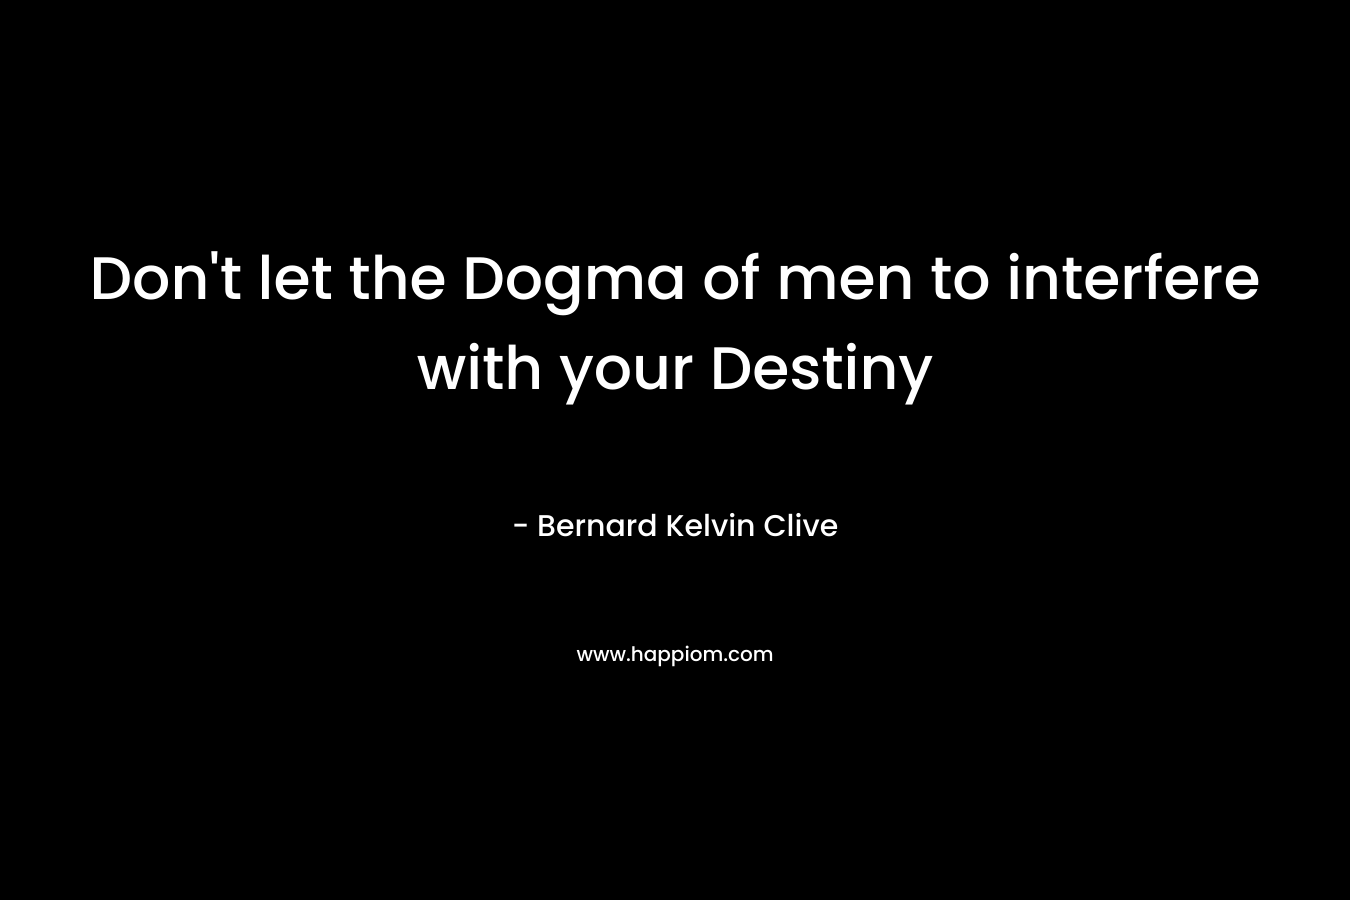 Don't let the Dogma of men to interfere with your Destiny